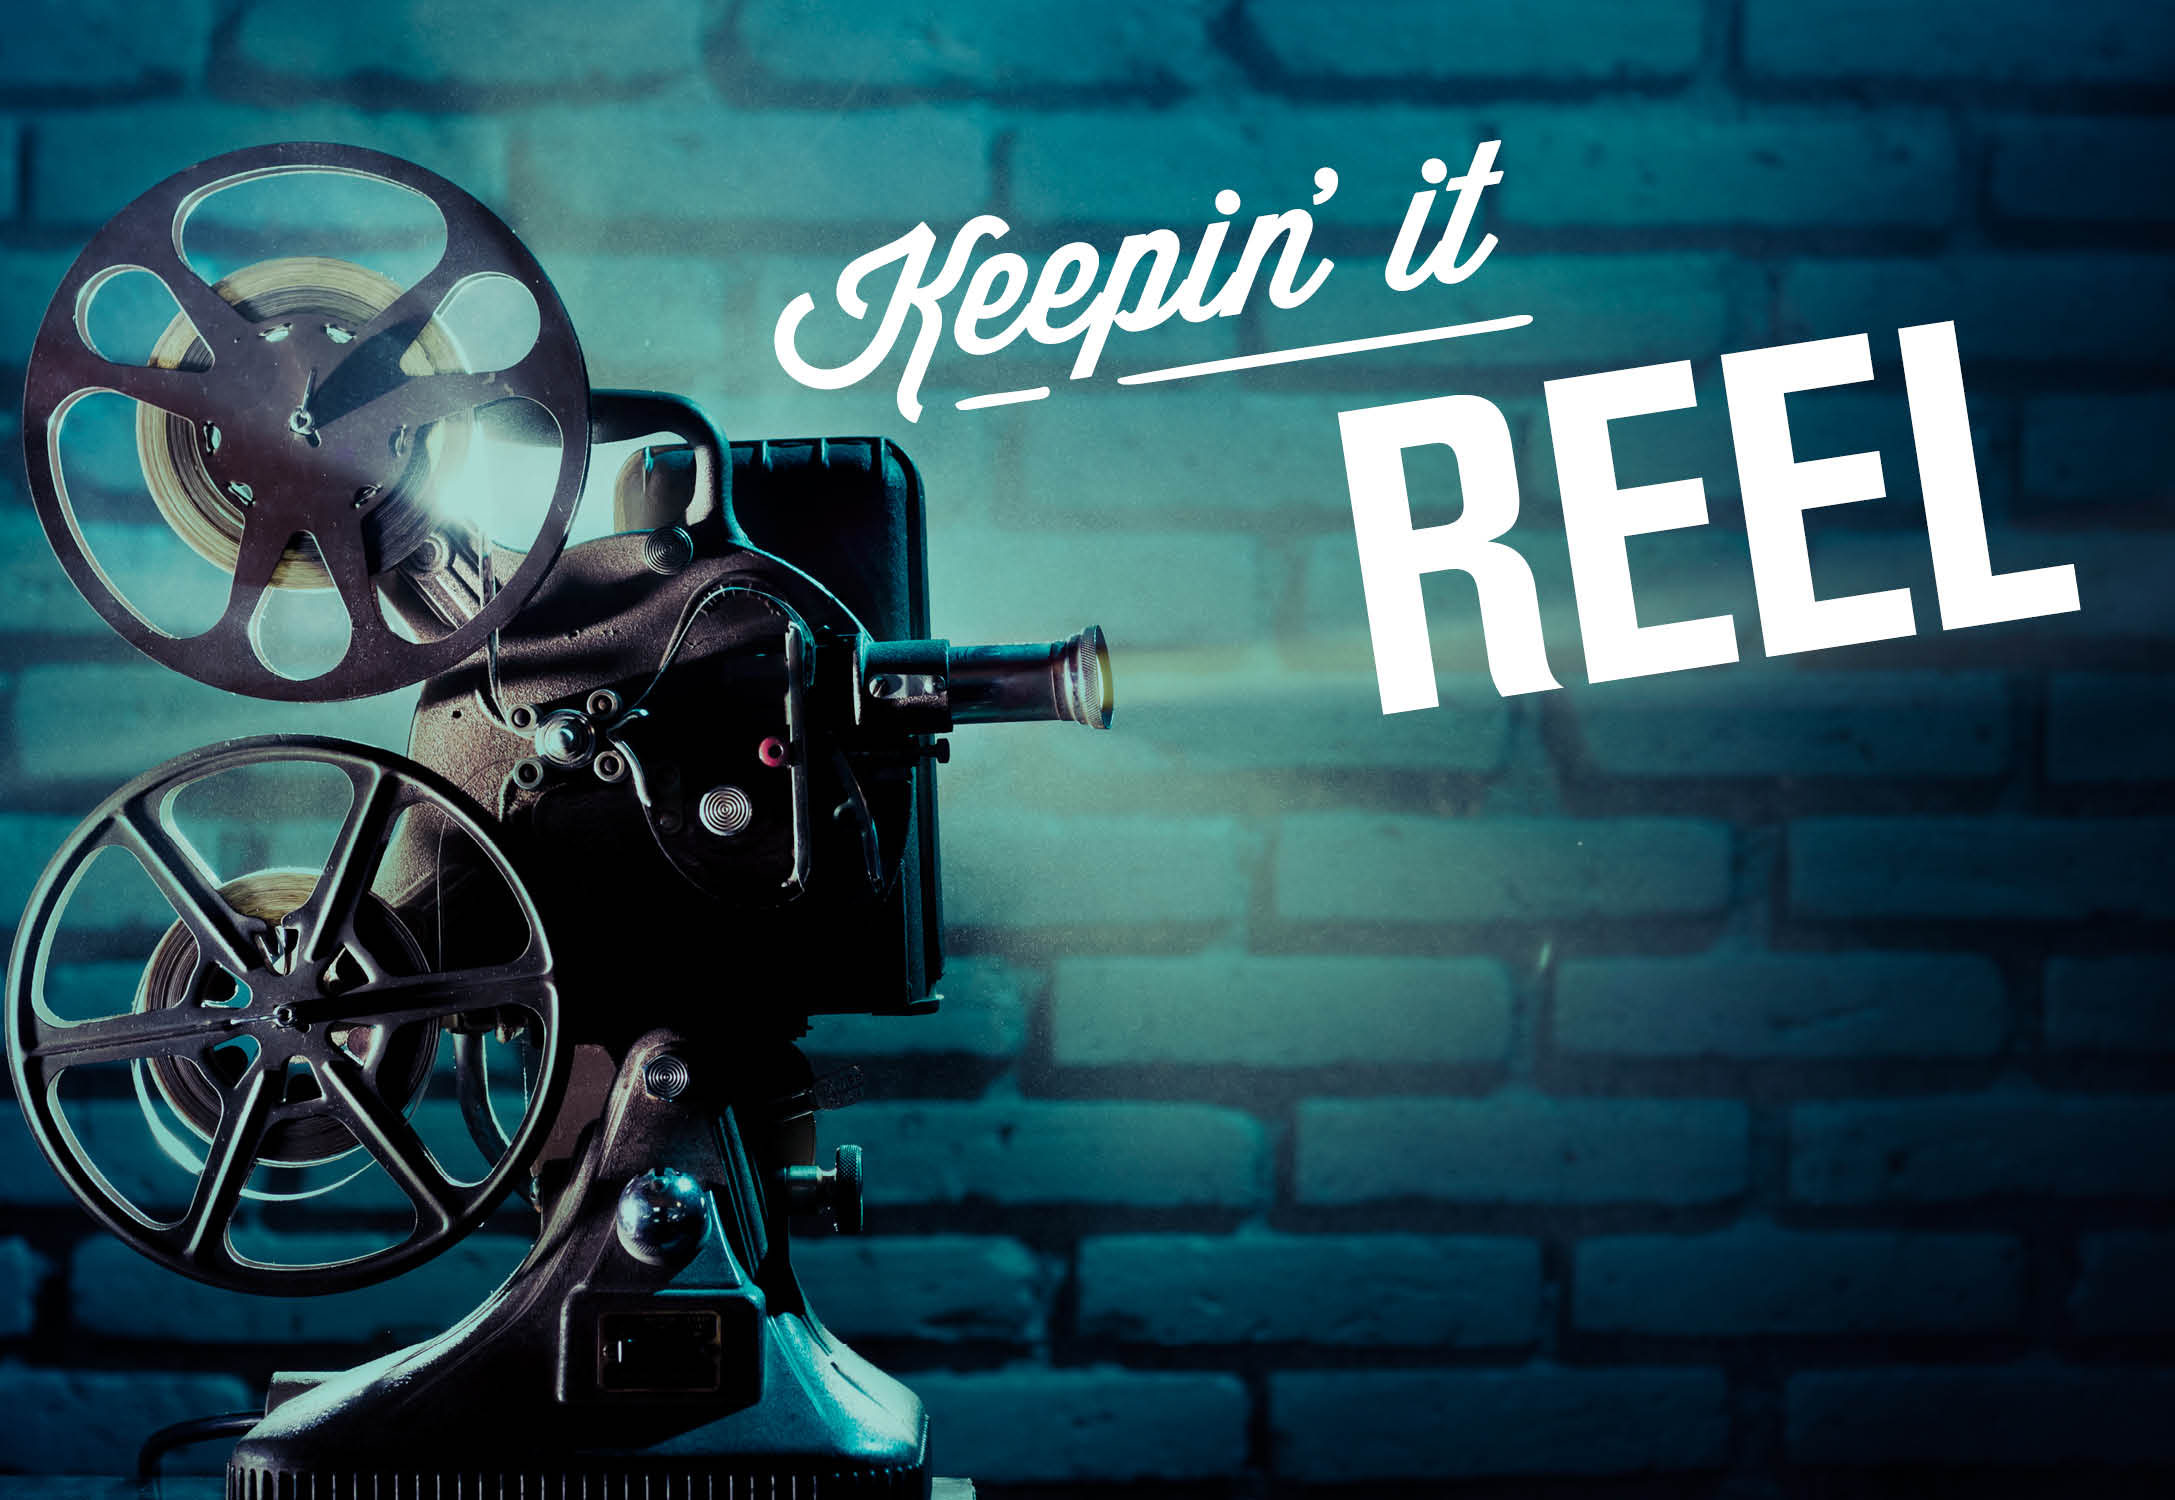 A film projector with the text 'Keepin' it Reel' on a brick wall